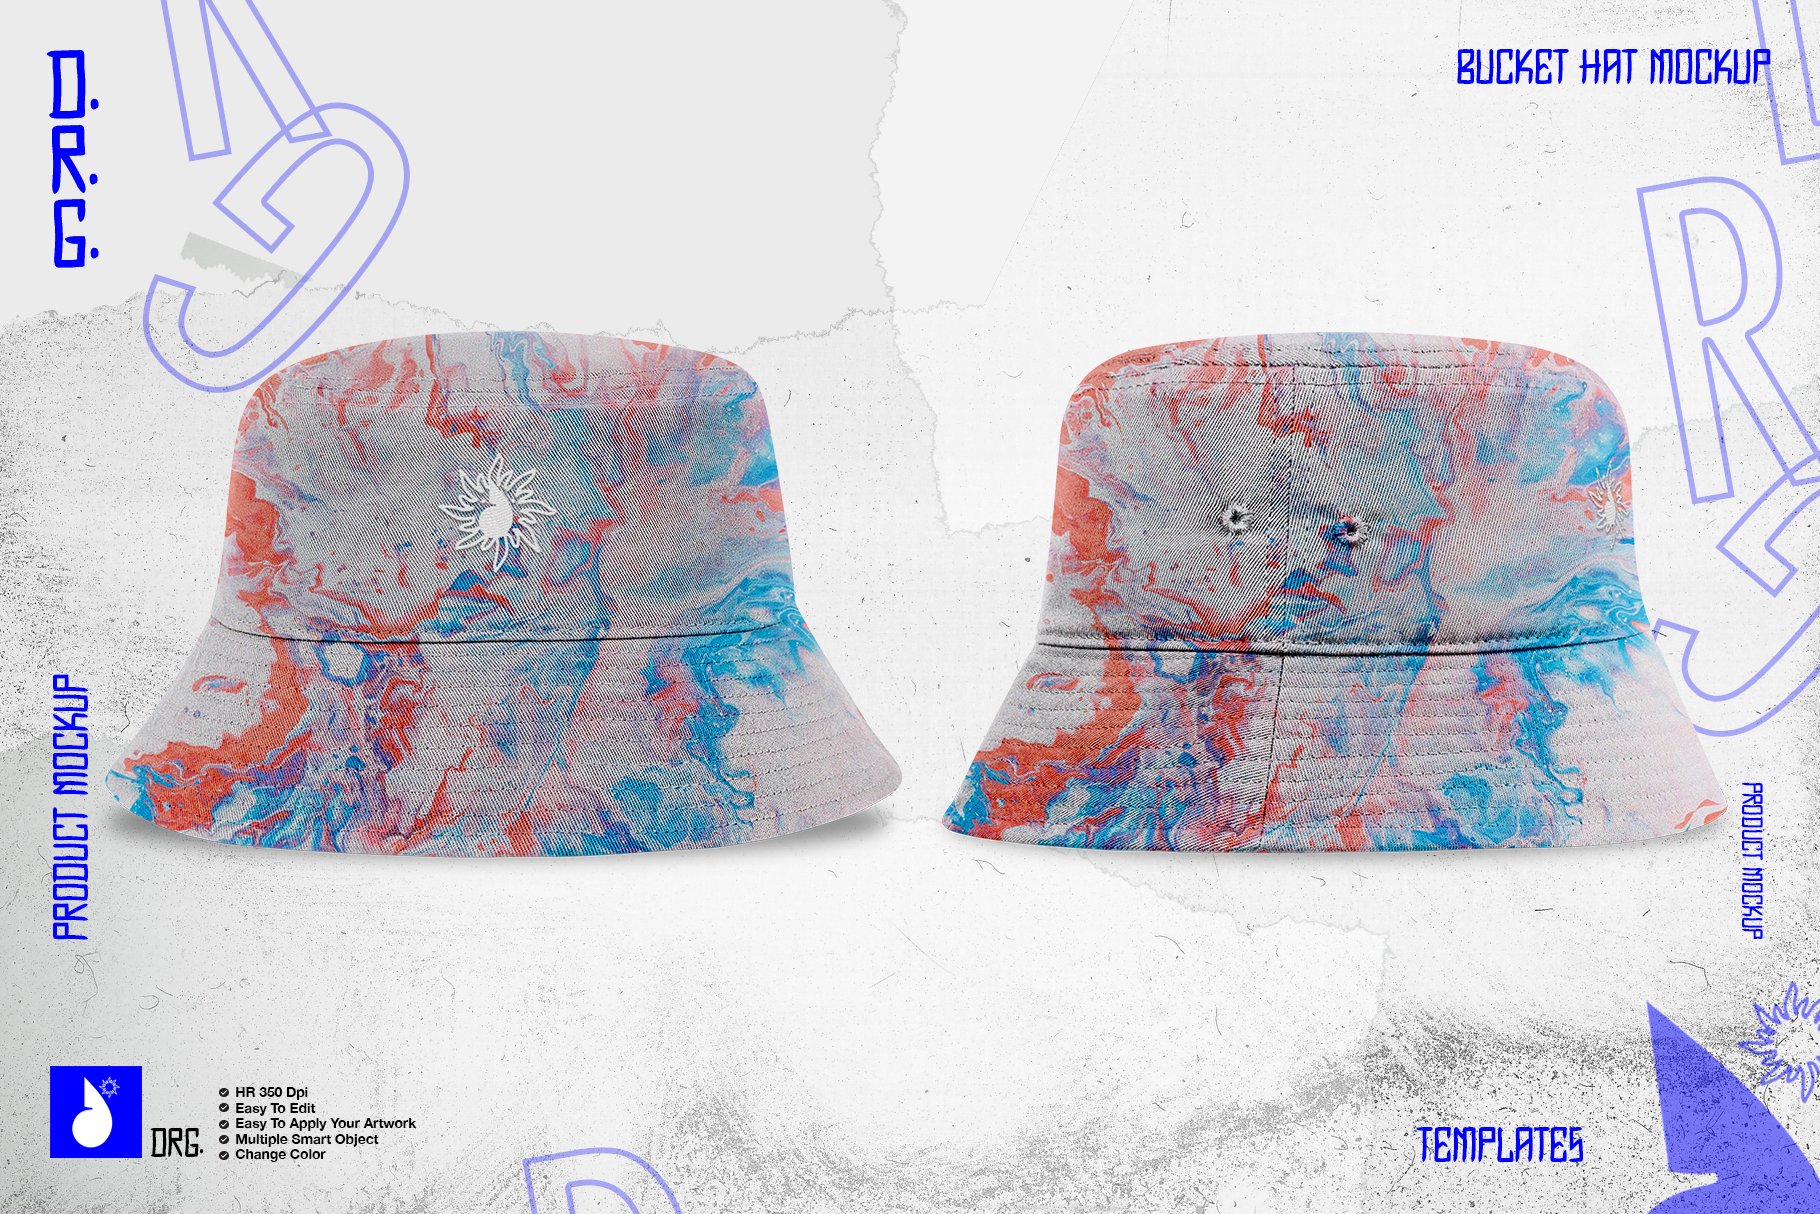 Bucket Hat Mockup preview image.